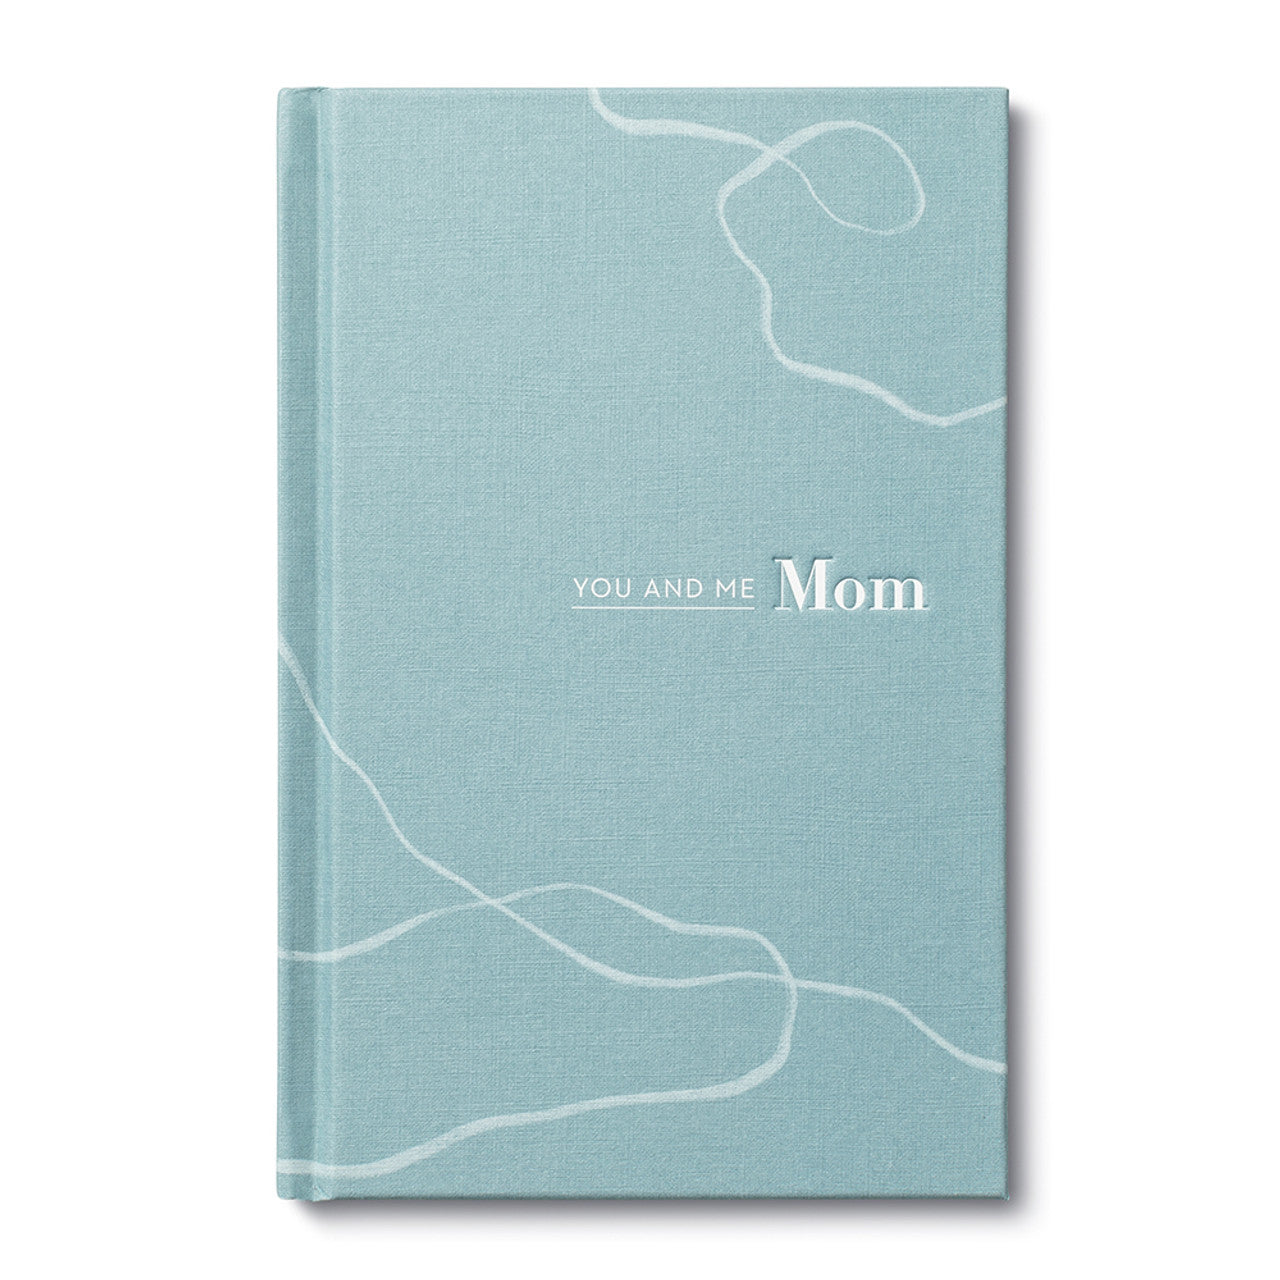 "You and Me, Mom" Book